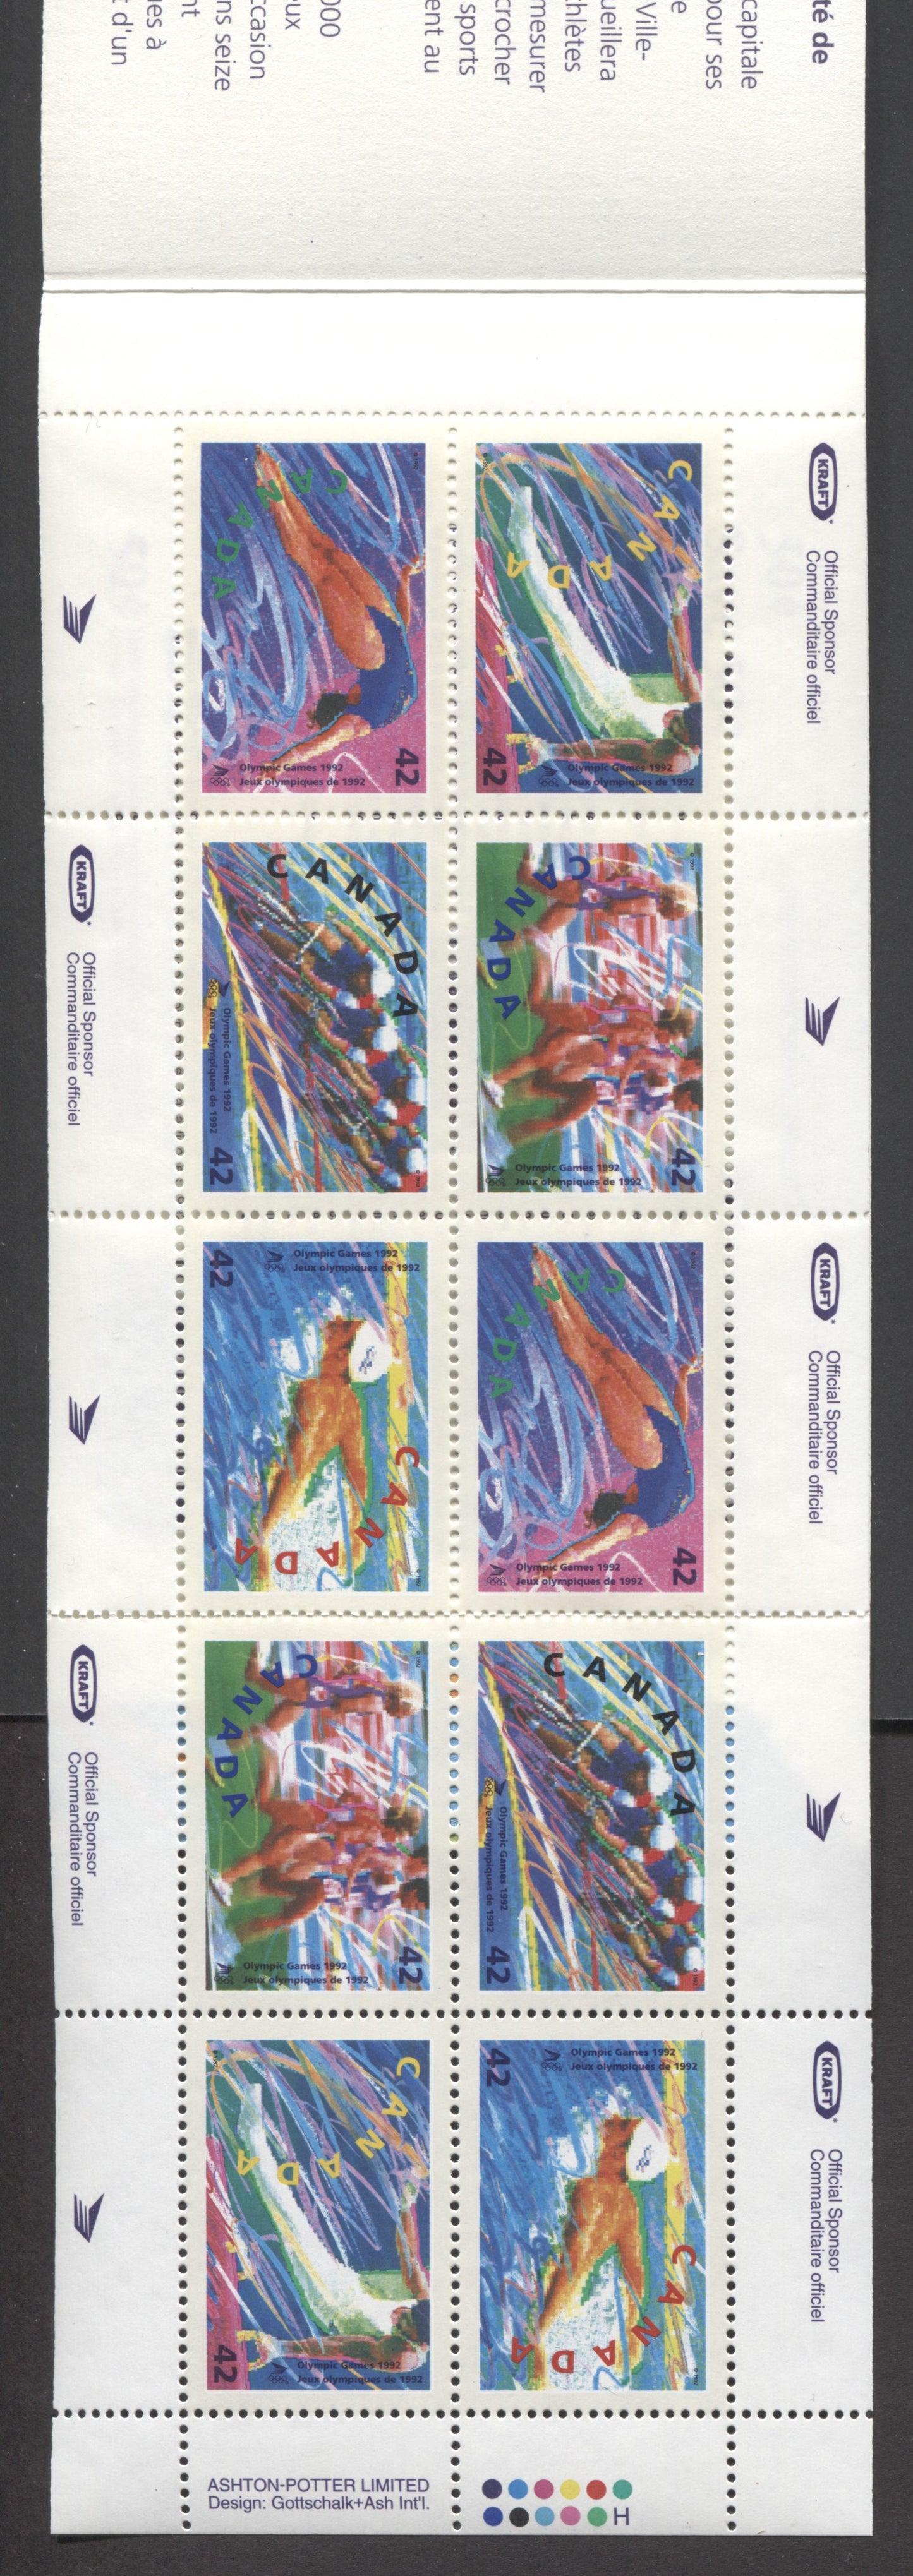 Canada #BK146a-d 1992 Summer Olympics Issue, Complete $4.20  Booklet, Harrison Paper, Dead Paper, 4 mm GT-4 Tagging